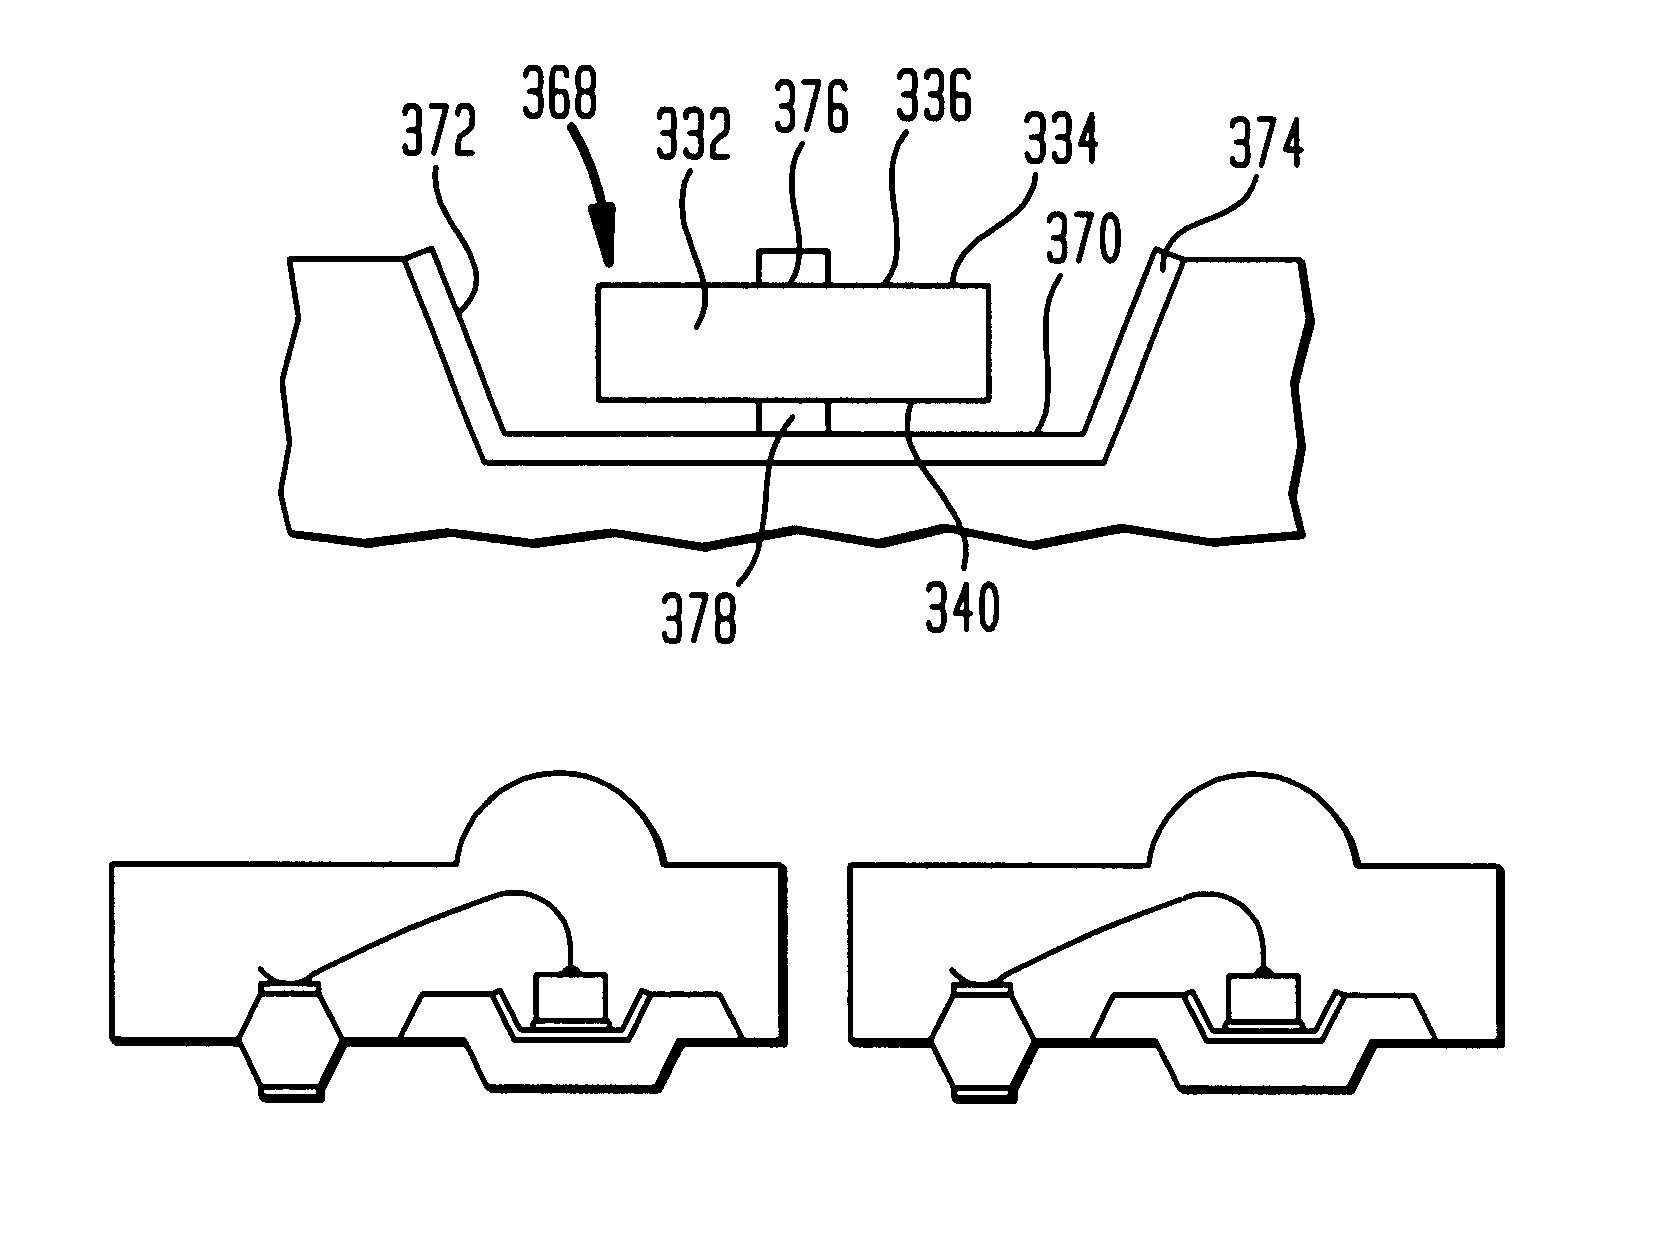 Semiconductor packages having light-sensitive chips